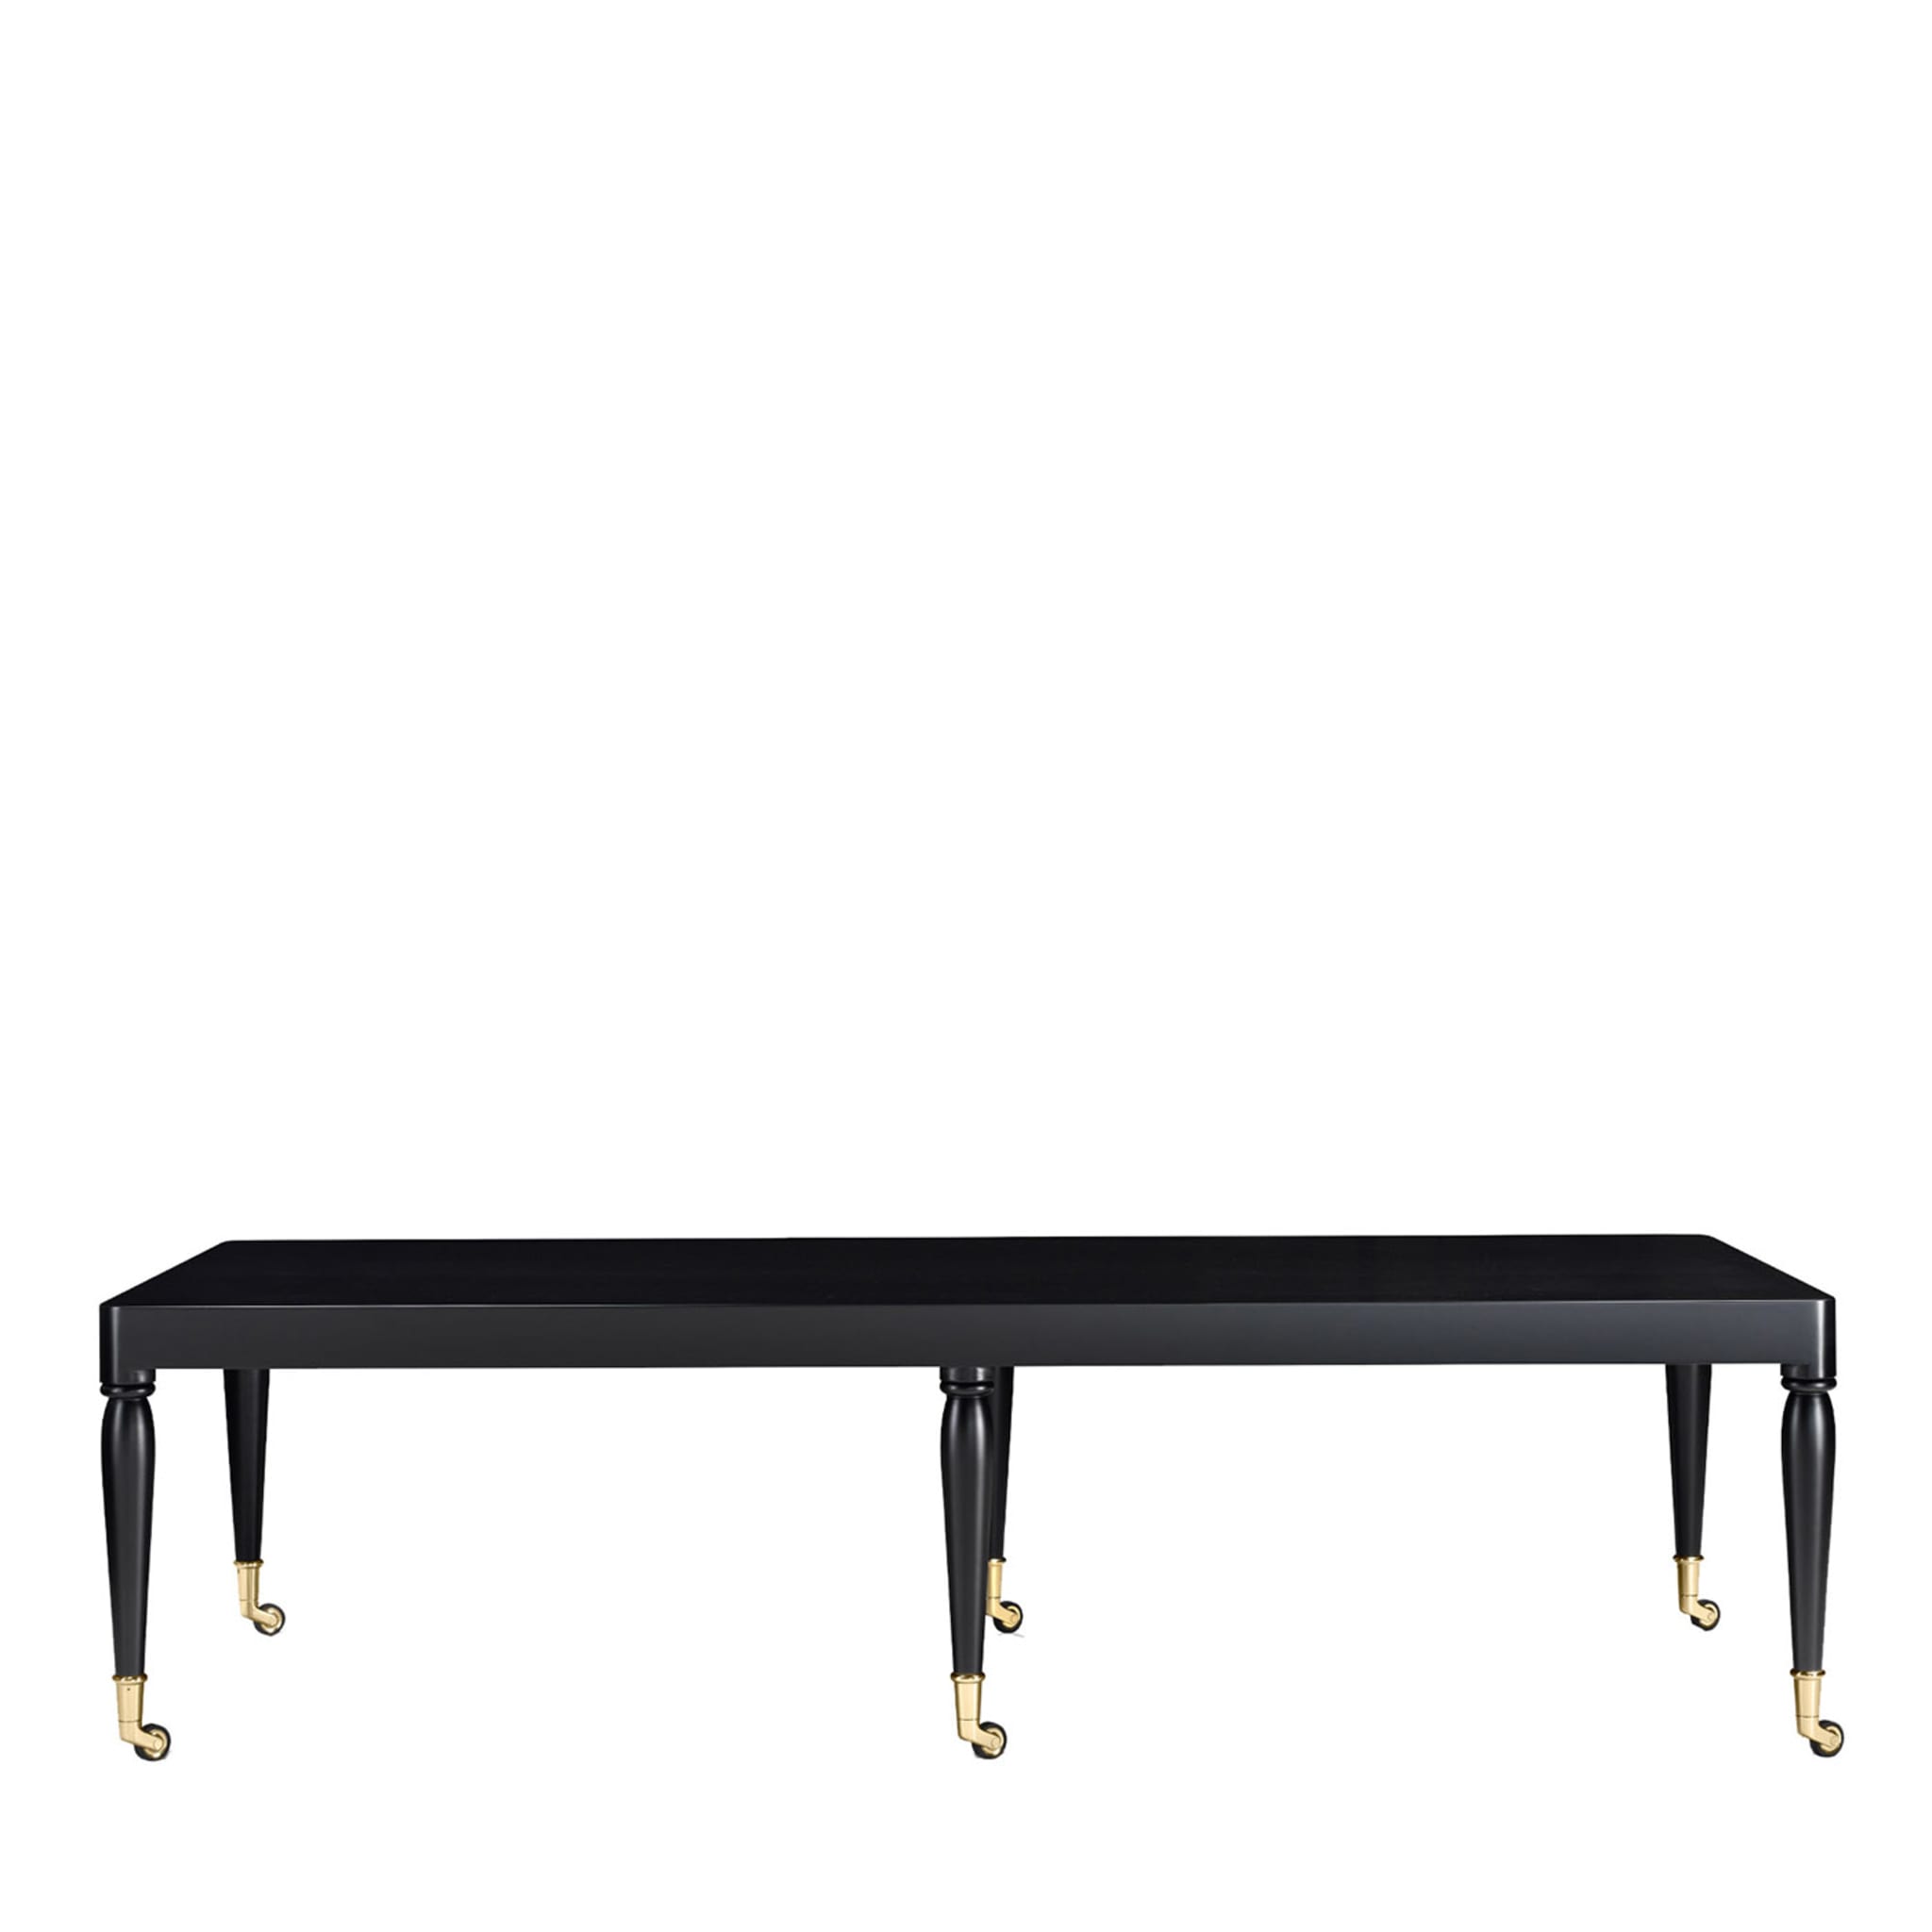 Shaker Black Dining Table by Stefano Giovannoni - Main view